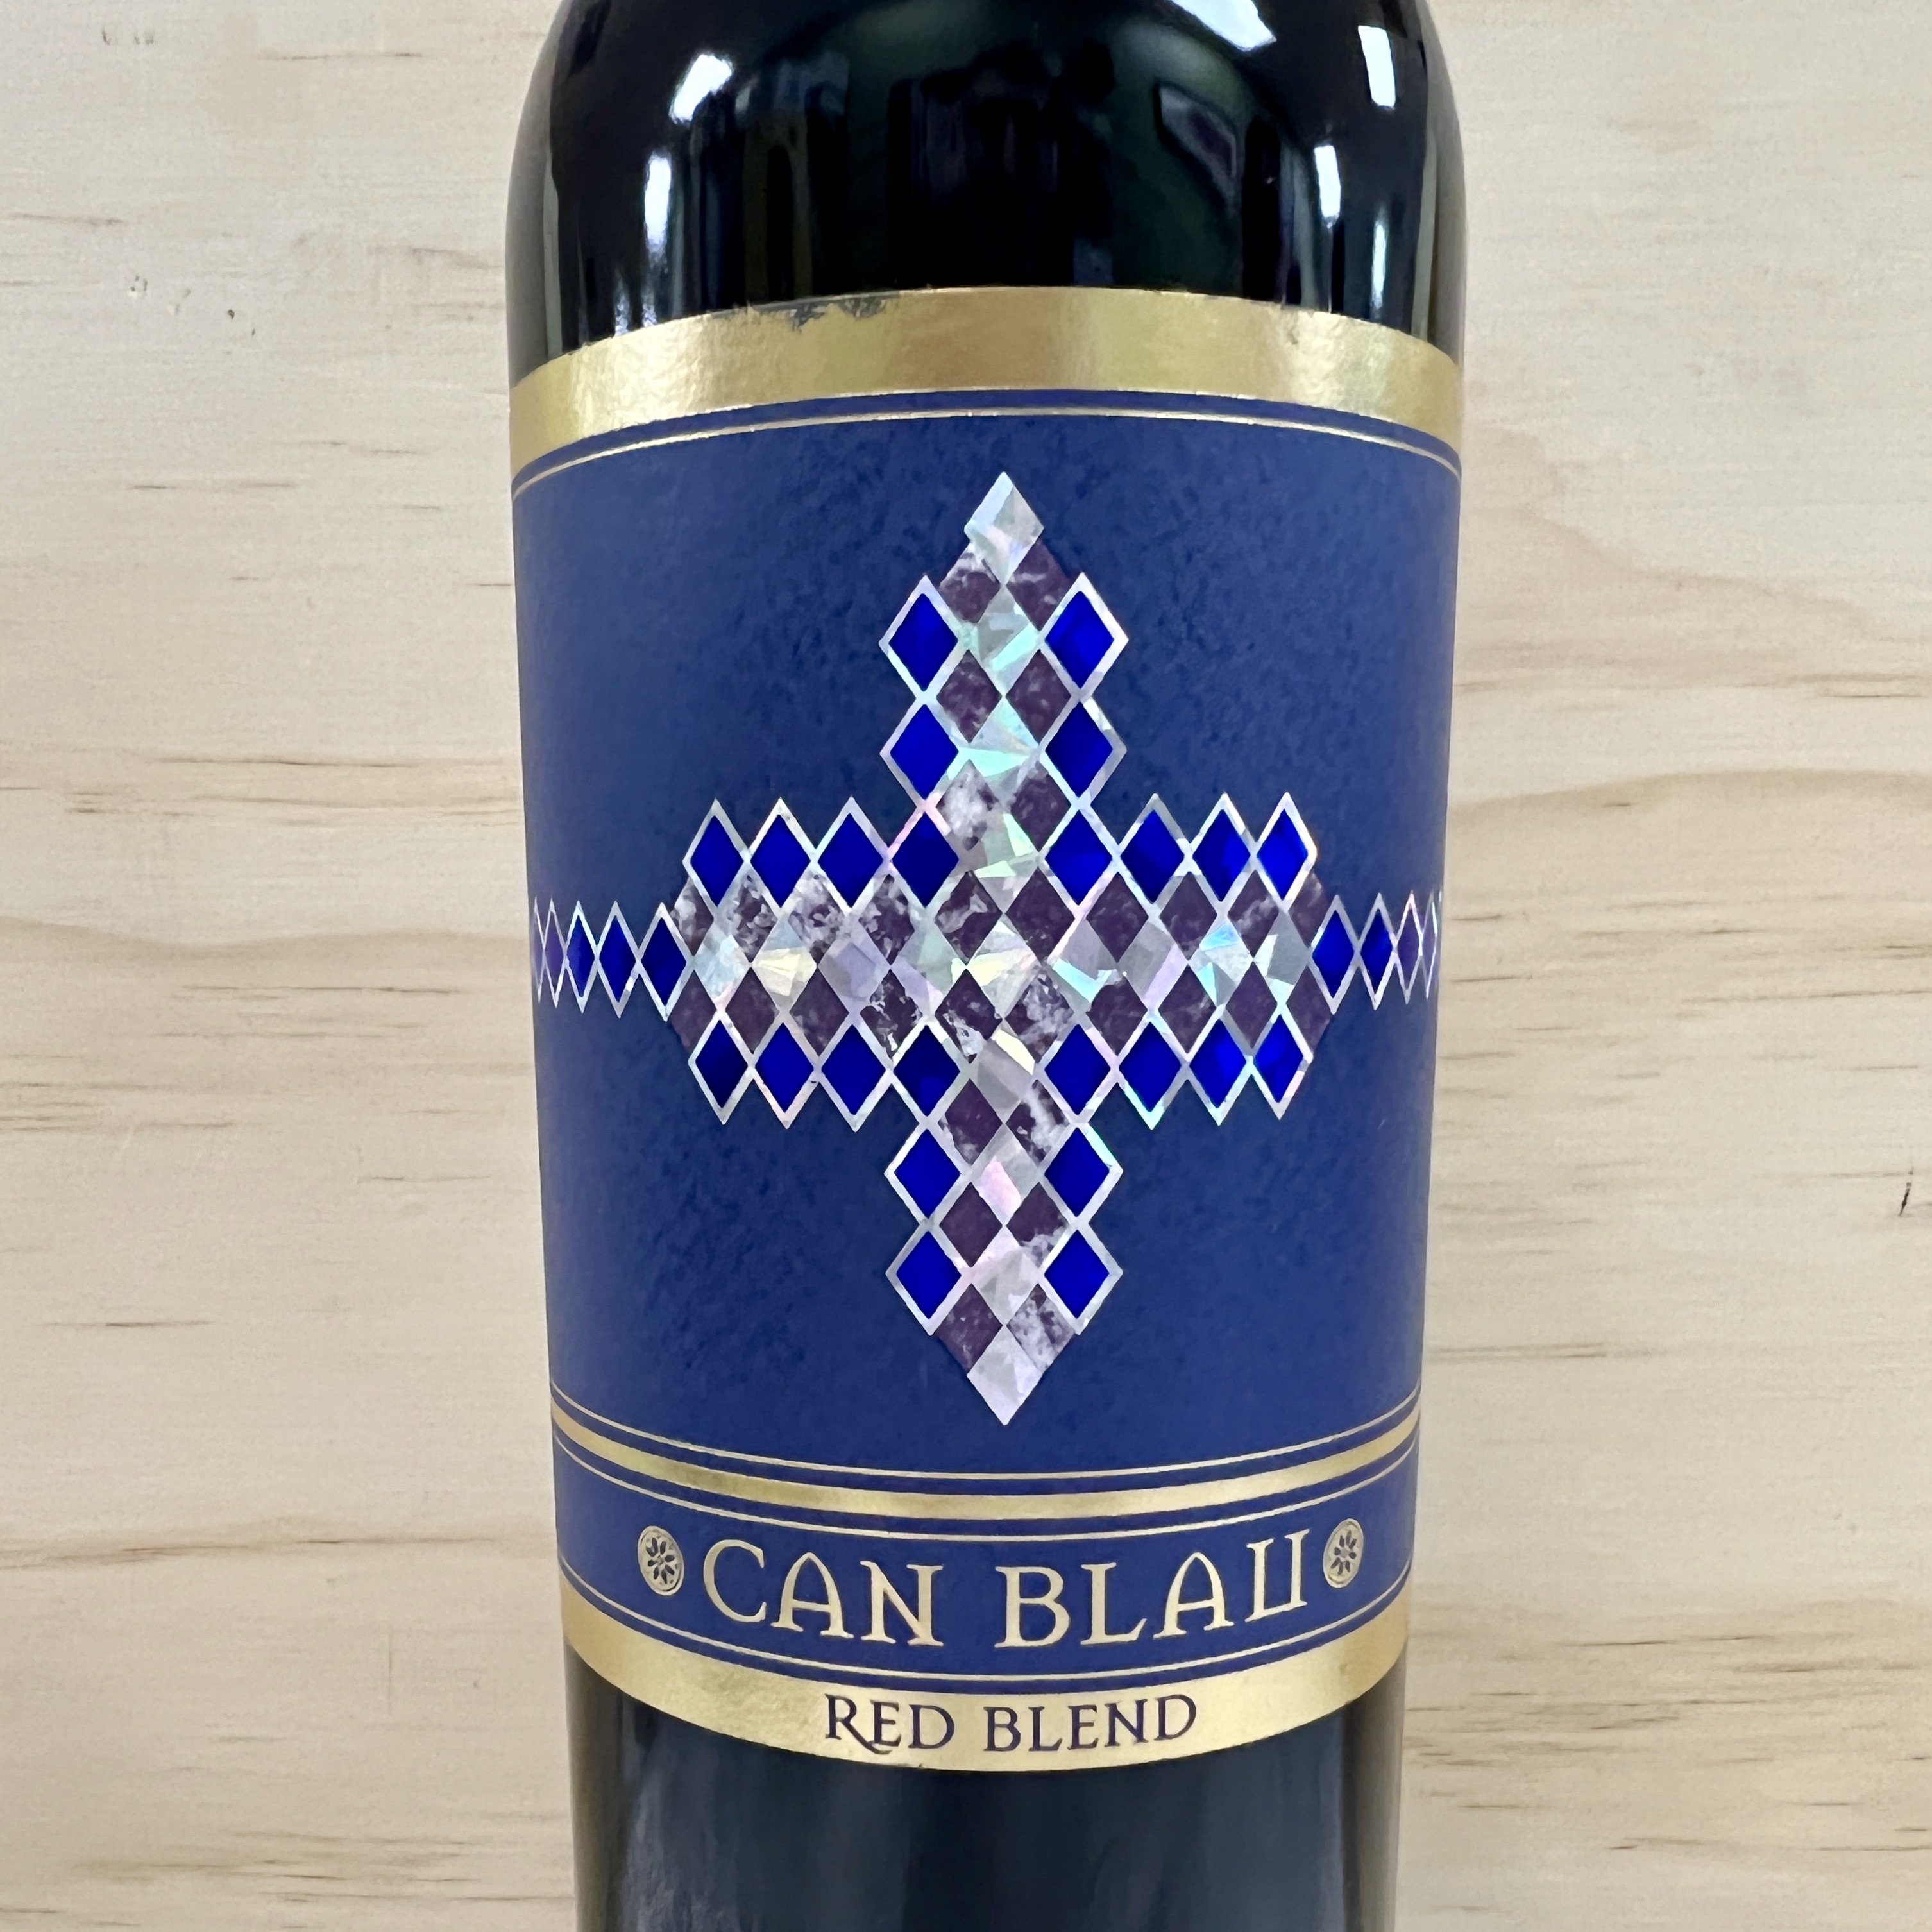 Can Blau Red Blend Montsant 2019